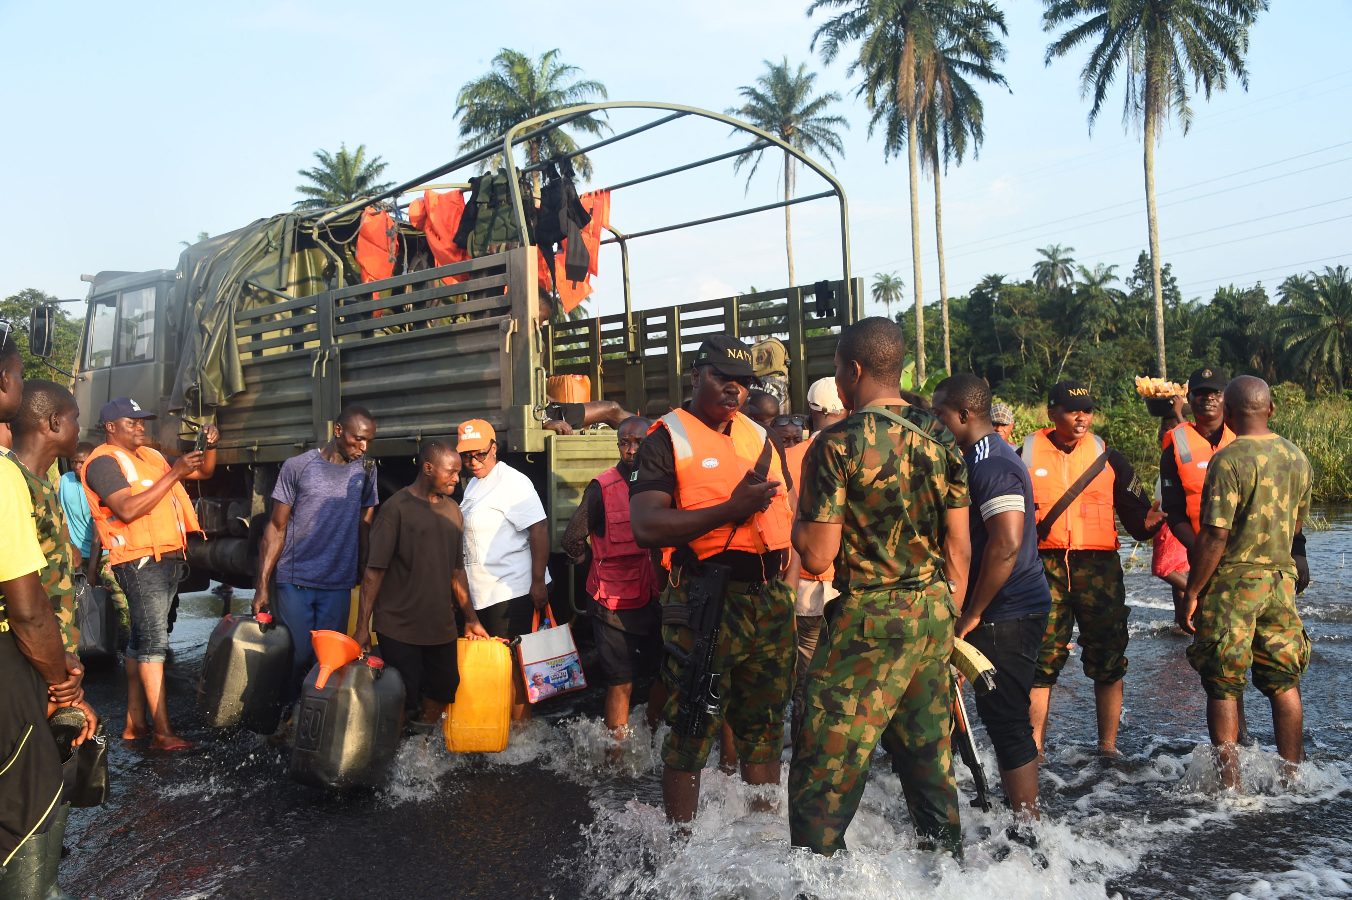 A group of Nigerians standing in flooded waters carry supplies onto a military truck after devastating flooding in September 2022.